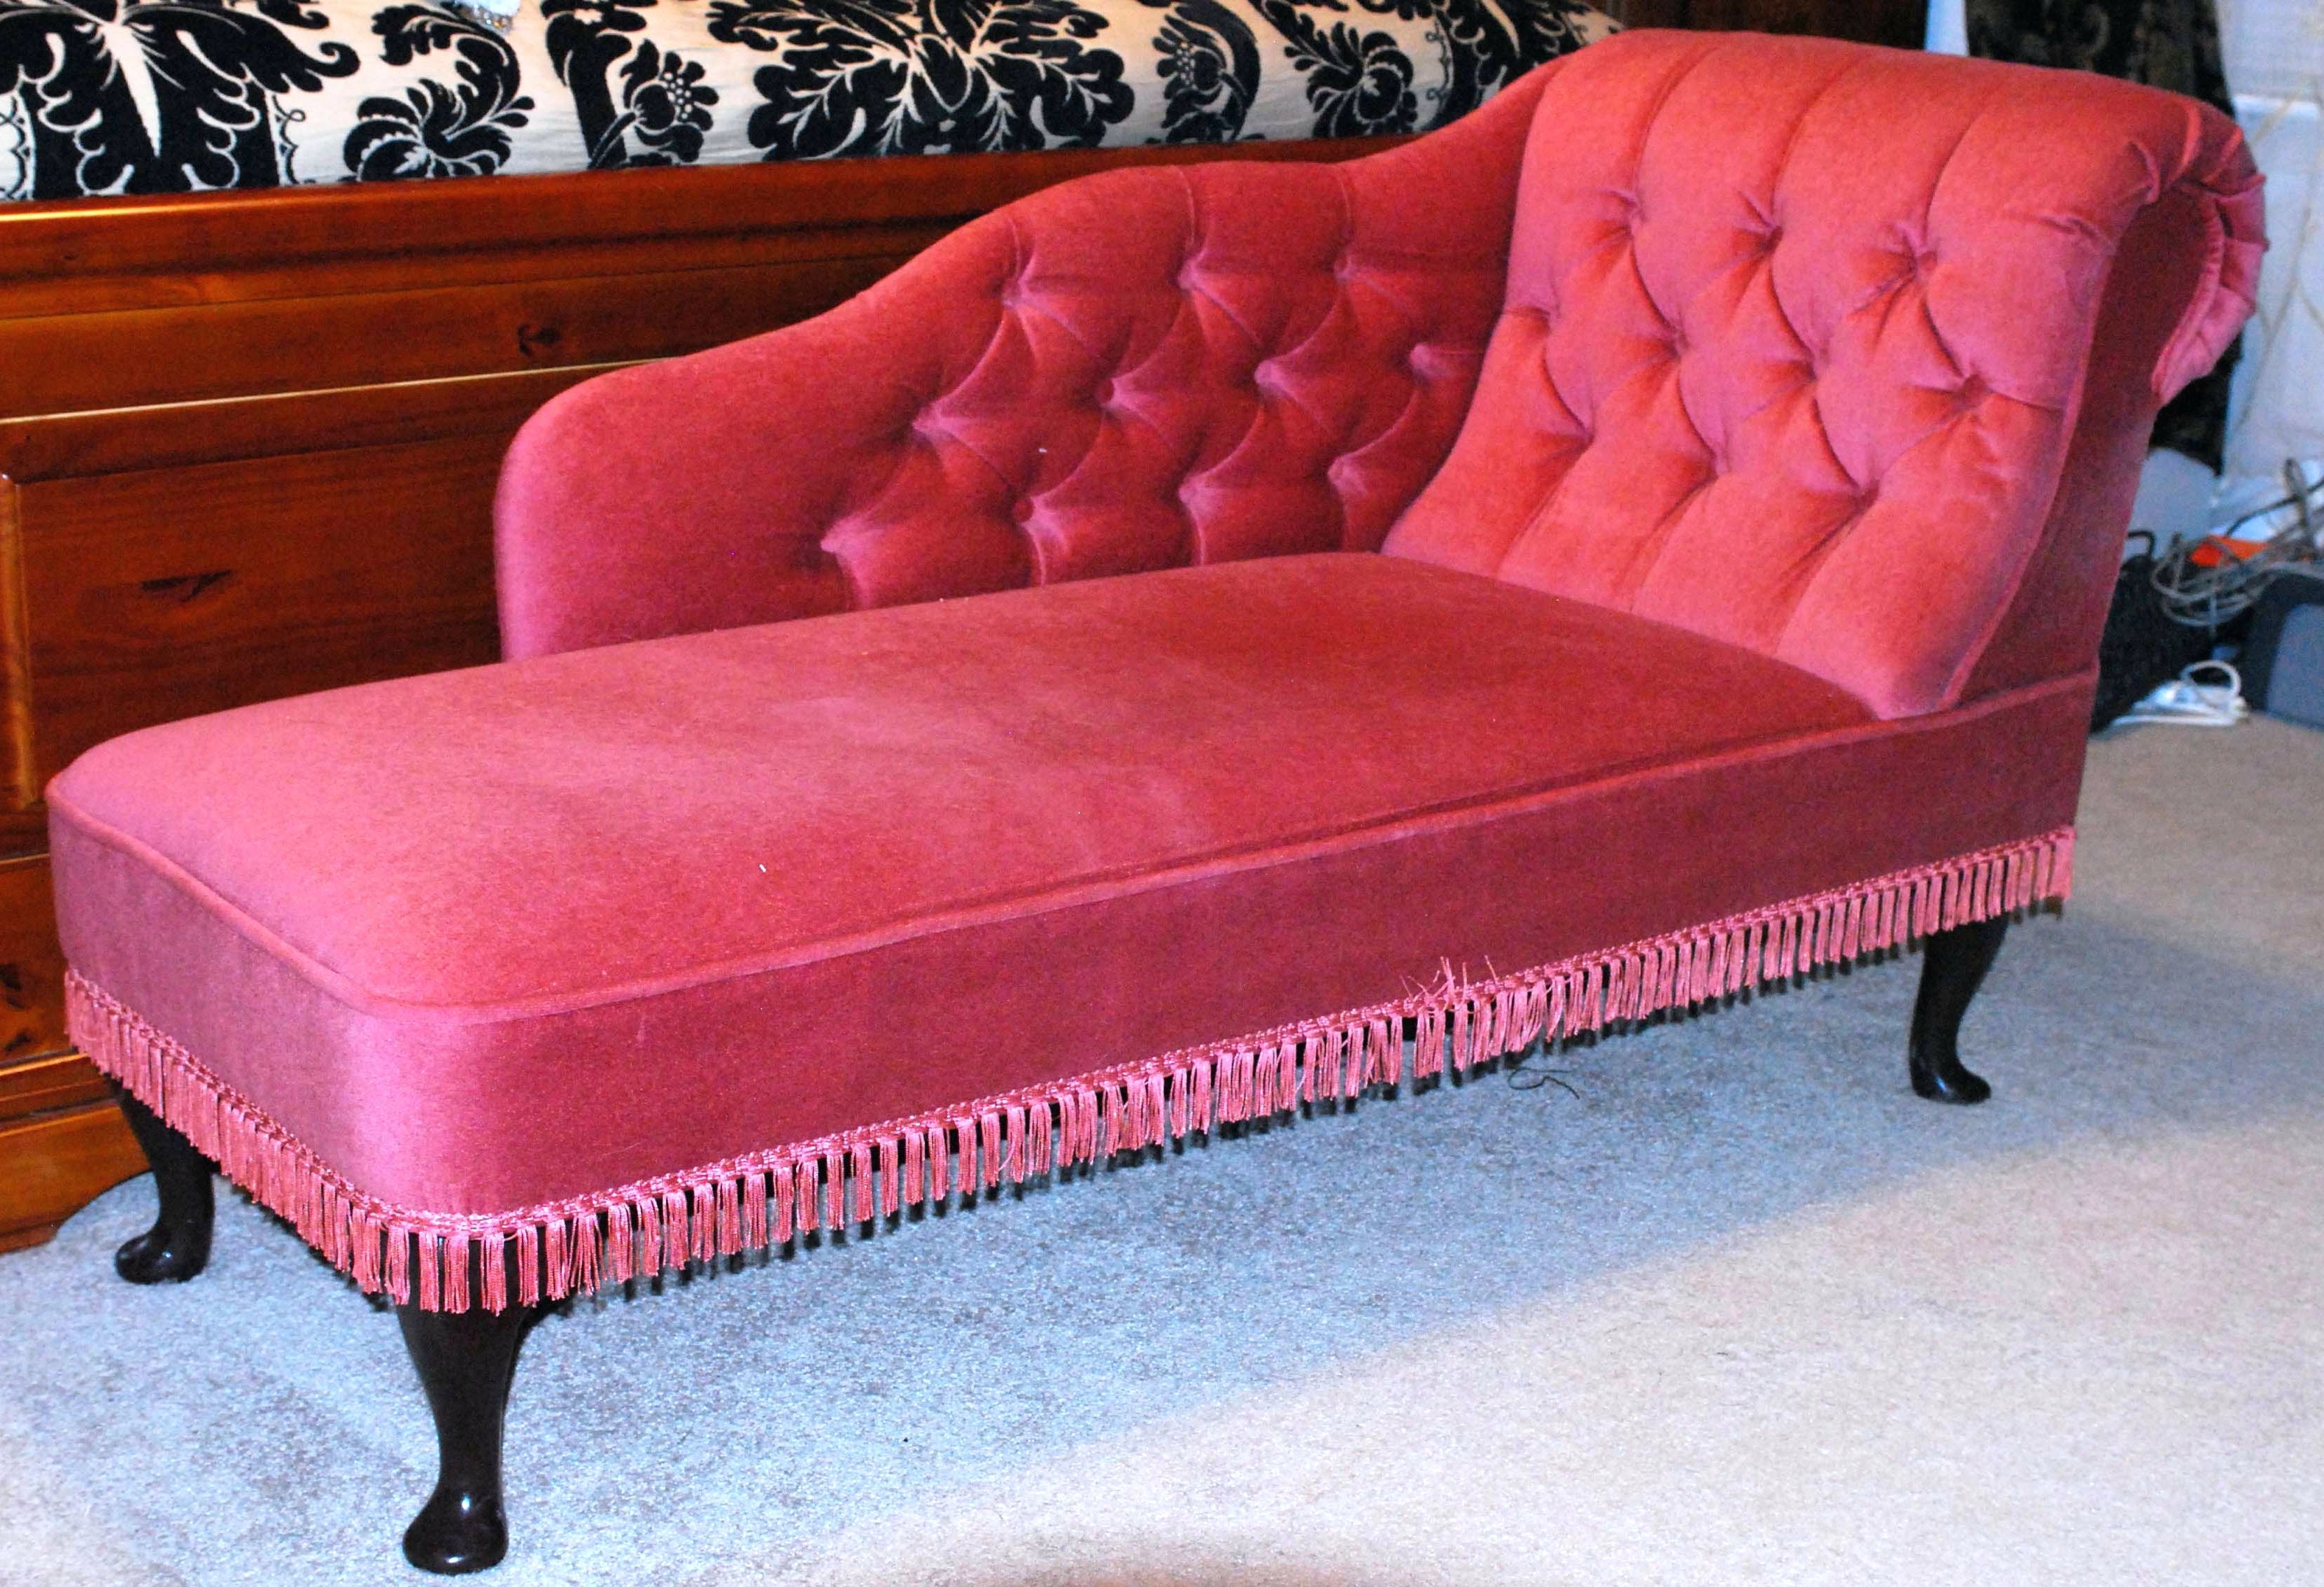 Recent Hot Pink Chaise Lounge Chairs In Pink Chaise Lounge Chair • Lounge Chairs Ideas (View 4 of 15)